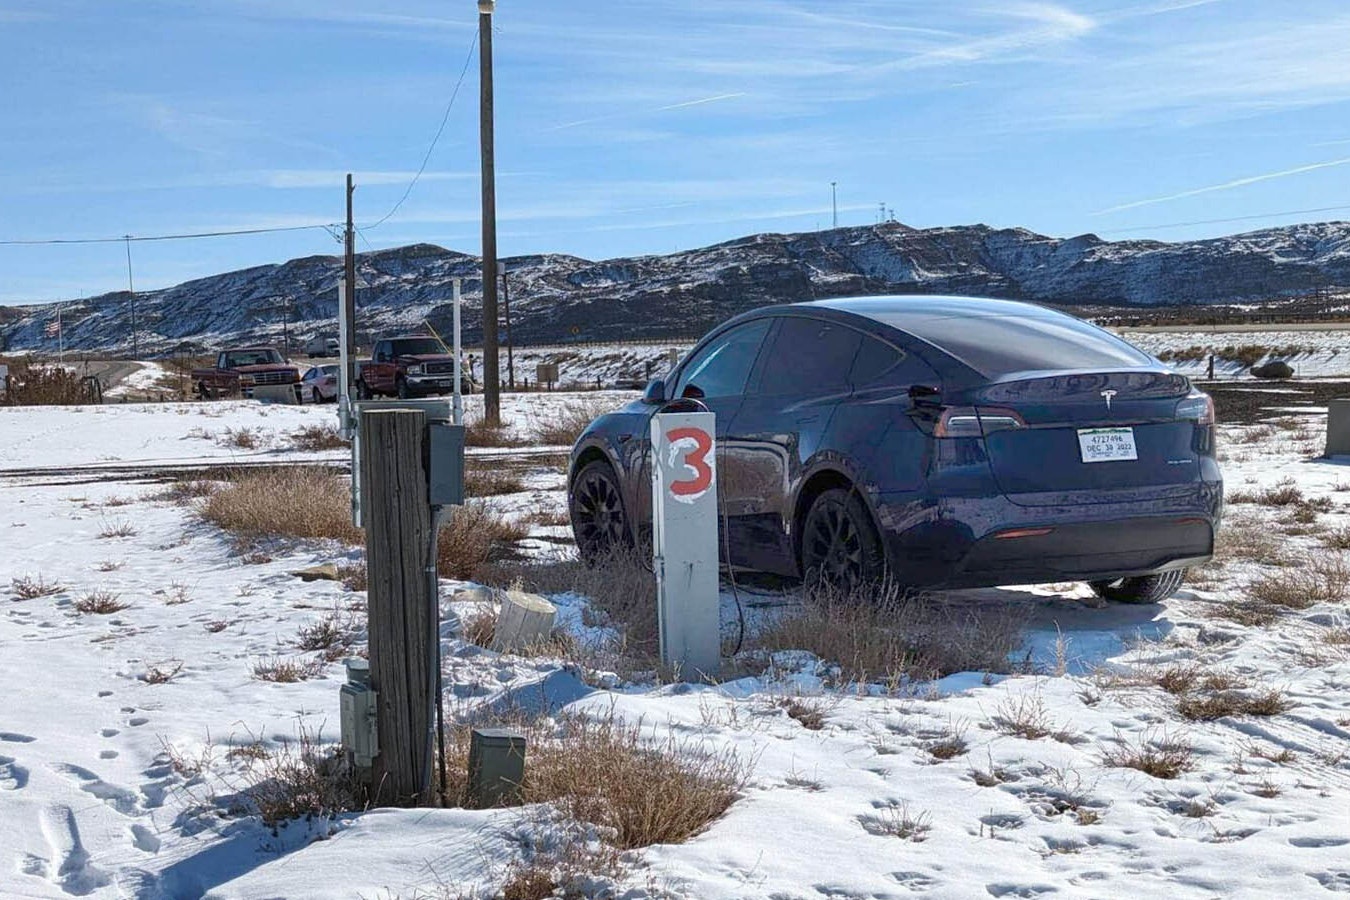 Roger Varley, owner of the Points of Rock Travel Center off Interstate 80 near the Jim Bridger power plant, uses a makeshift charging station at his RV camp to juice up Teslas and other electric vehicles.